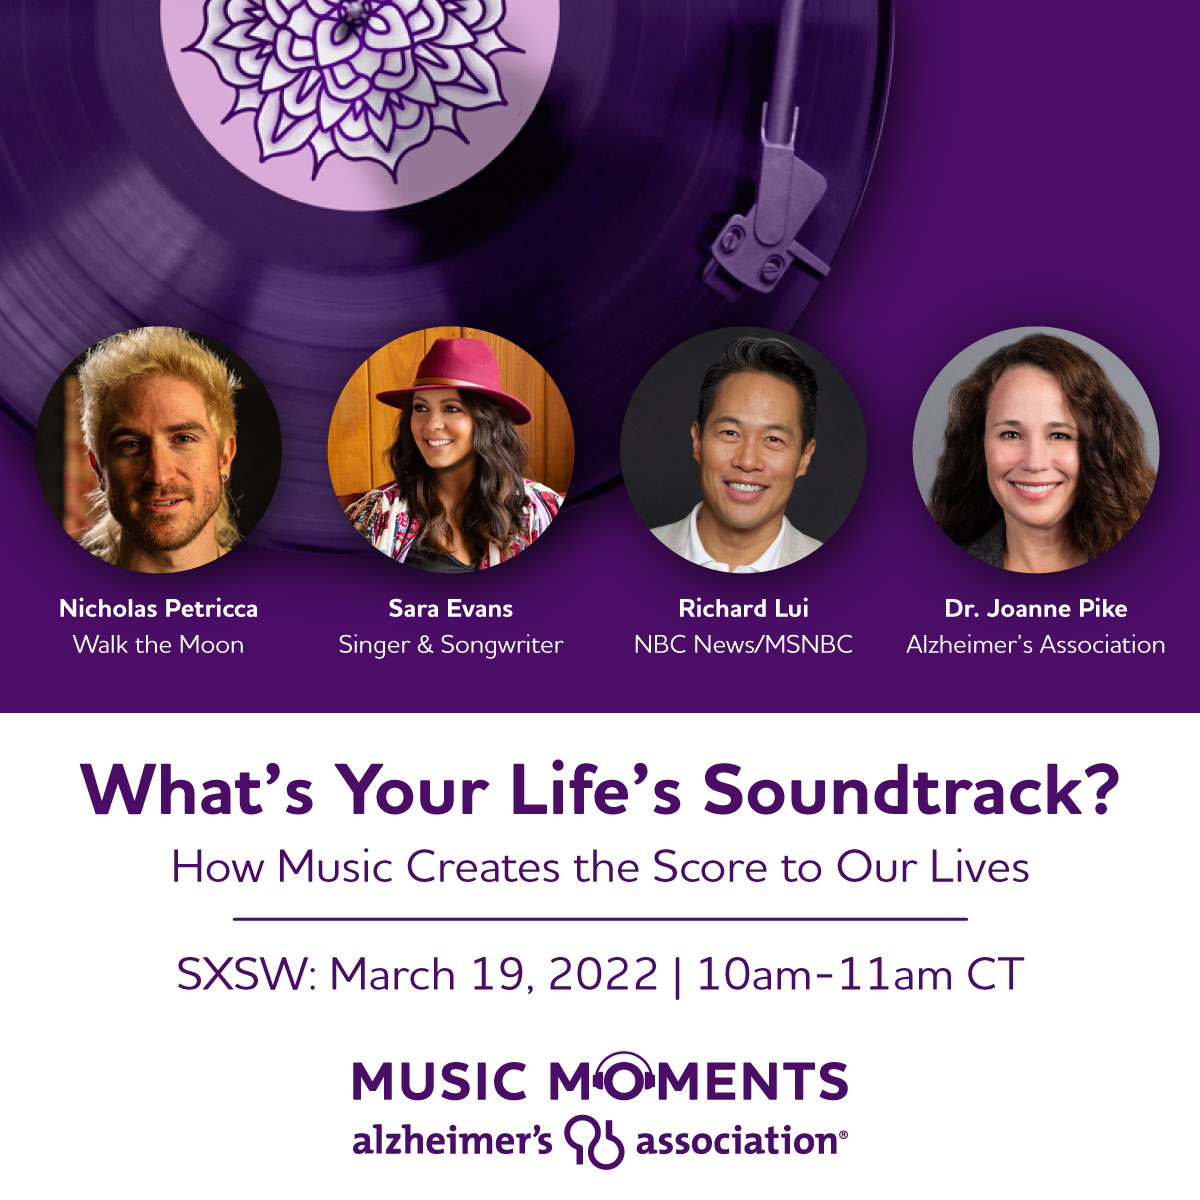 I look forward to joining @RichardLui, @SaraEvansMusic and @petricholas at #SXSW tomorrow morning to discuss @alzassociation’s #MusicMoments, a project dedicated to celebrating the connections that music creates throughout our lives.